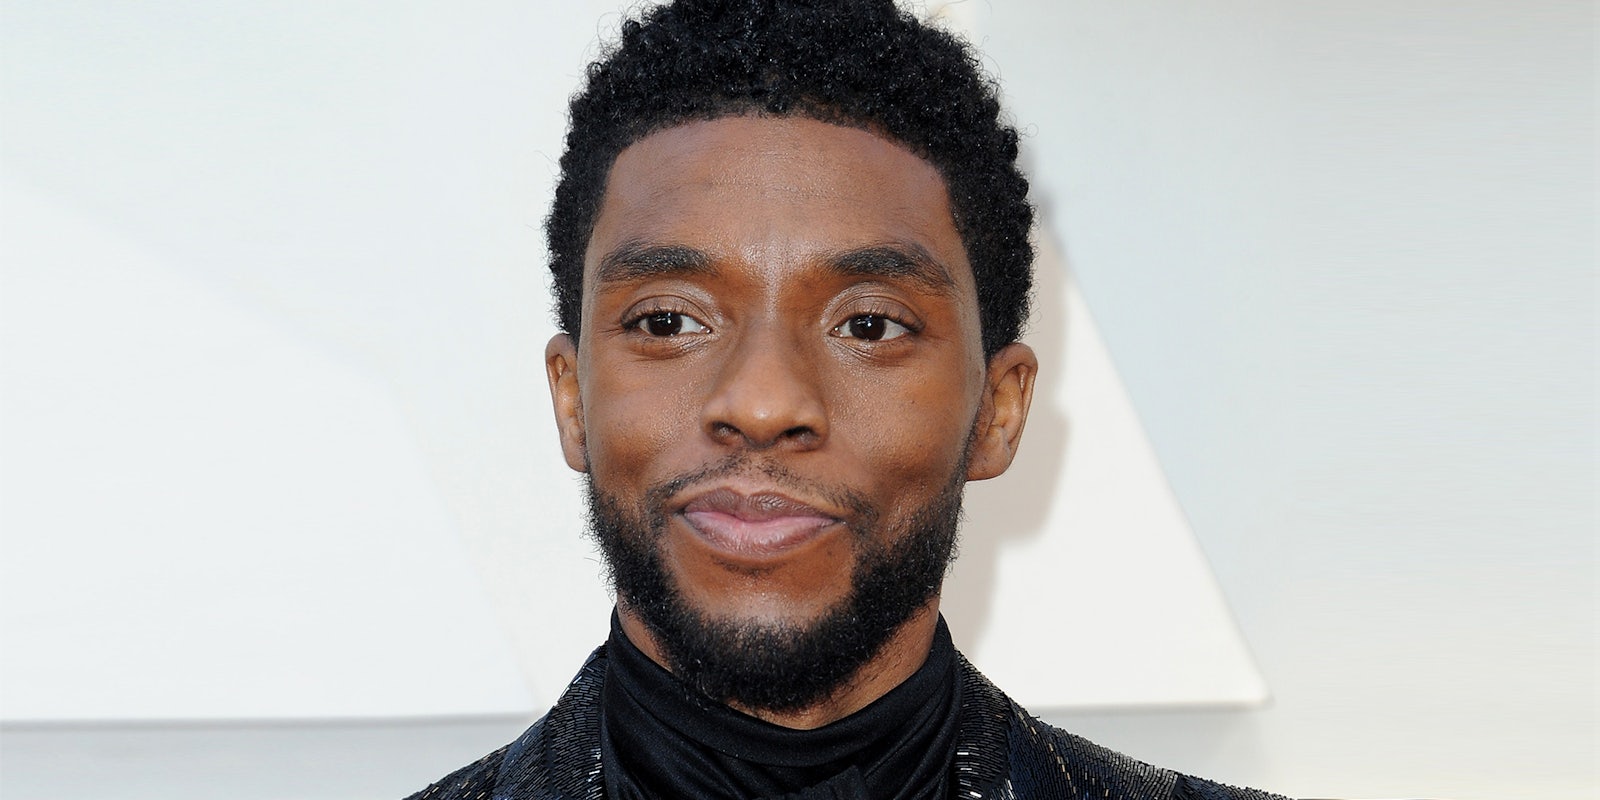 Chadwick Boseman at the 91st Annual Academy Awards held at the Hollywood and Highland in Los Angeles, USA on February 24, 2019.